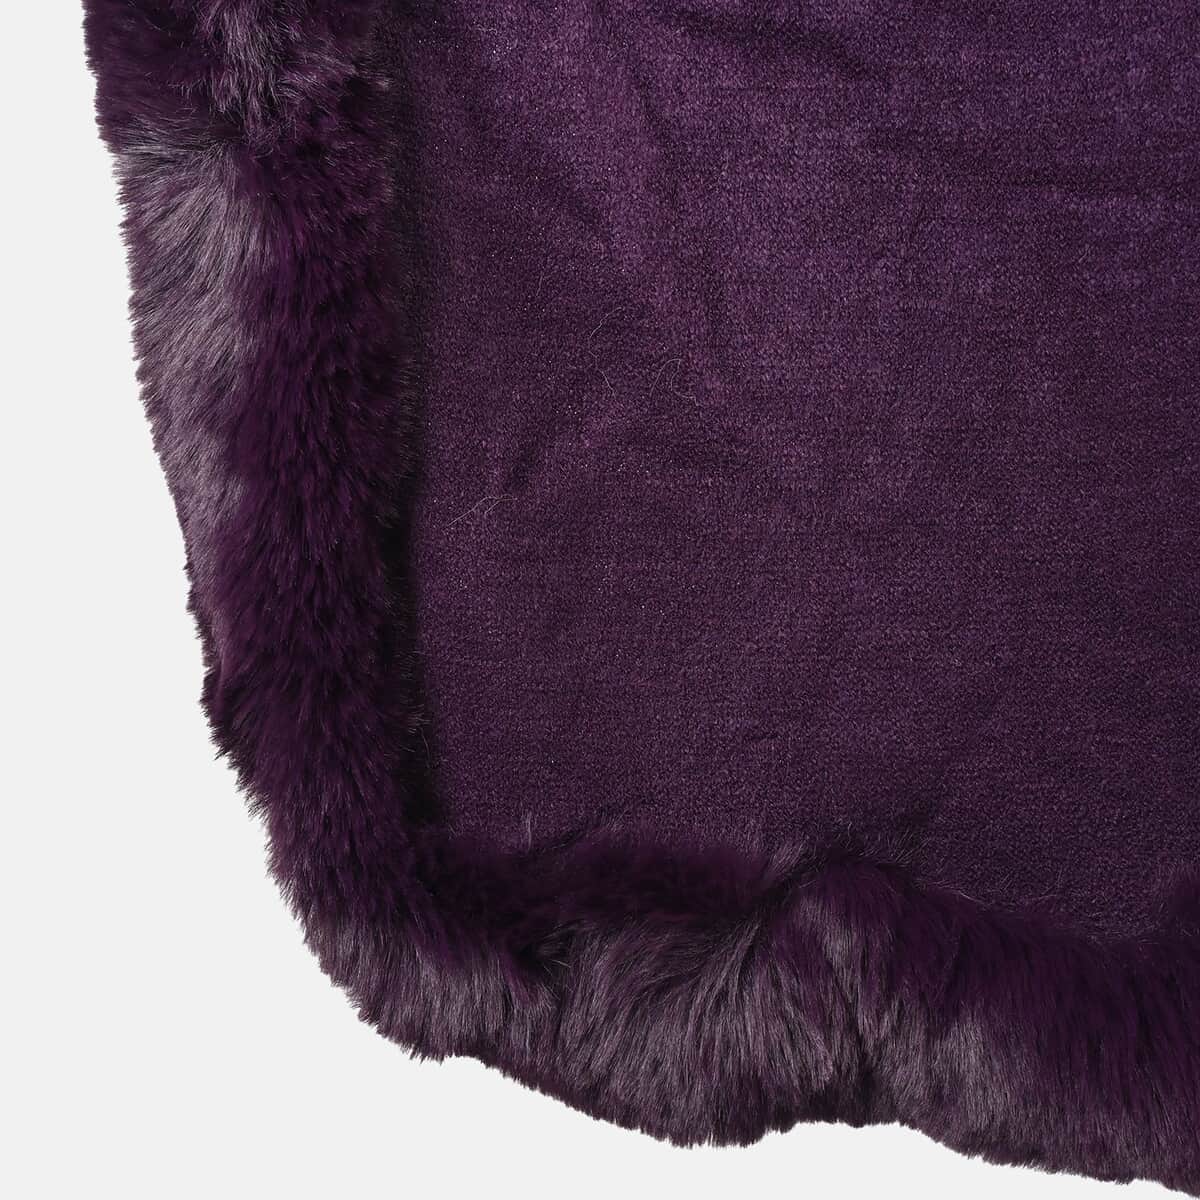 Tamsy Purple Ruana with Faux Fur Trim - One Size Fits Most image number 4